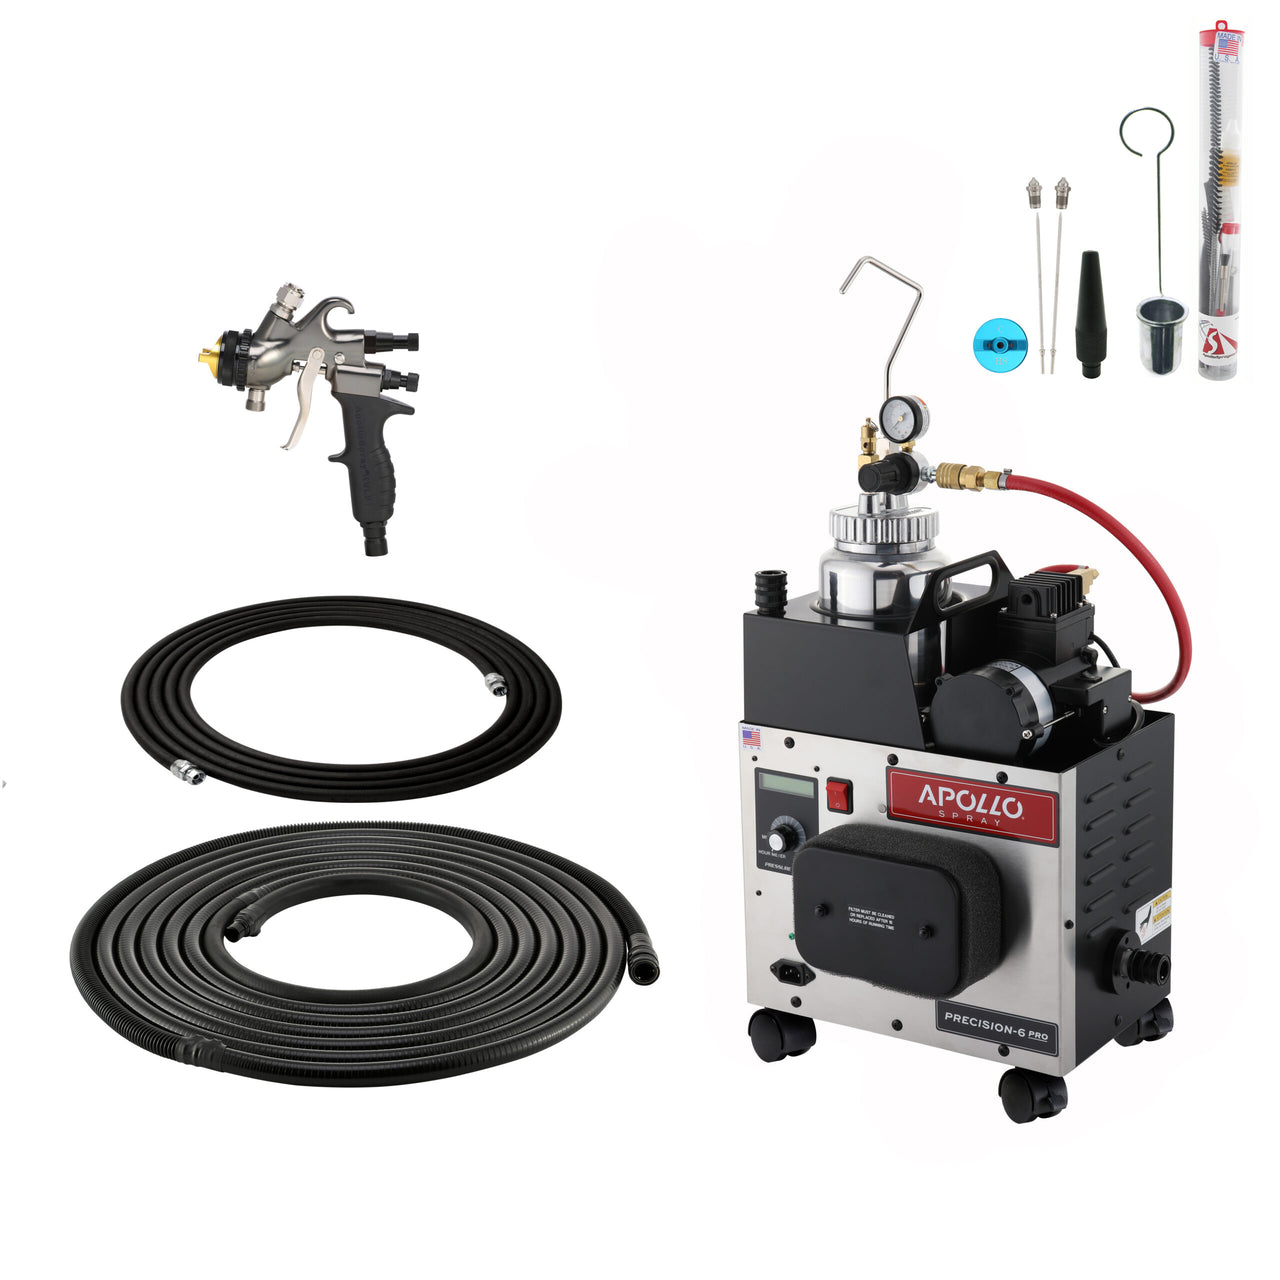 Apollo HVLP Precision-6 PRO with Pressure Pot System - Plus Package Paint Life Supply Co.